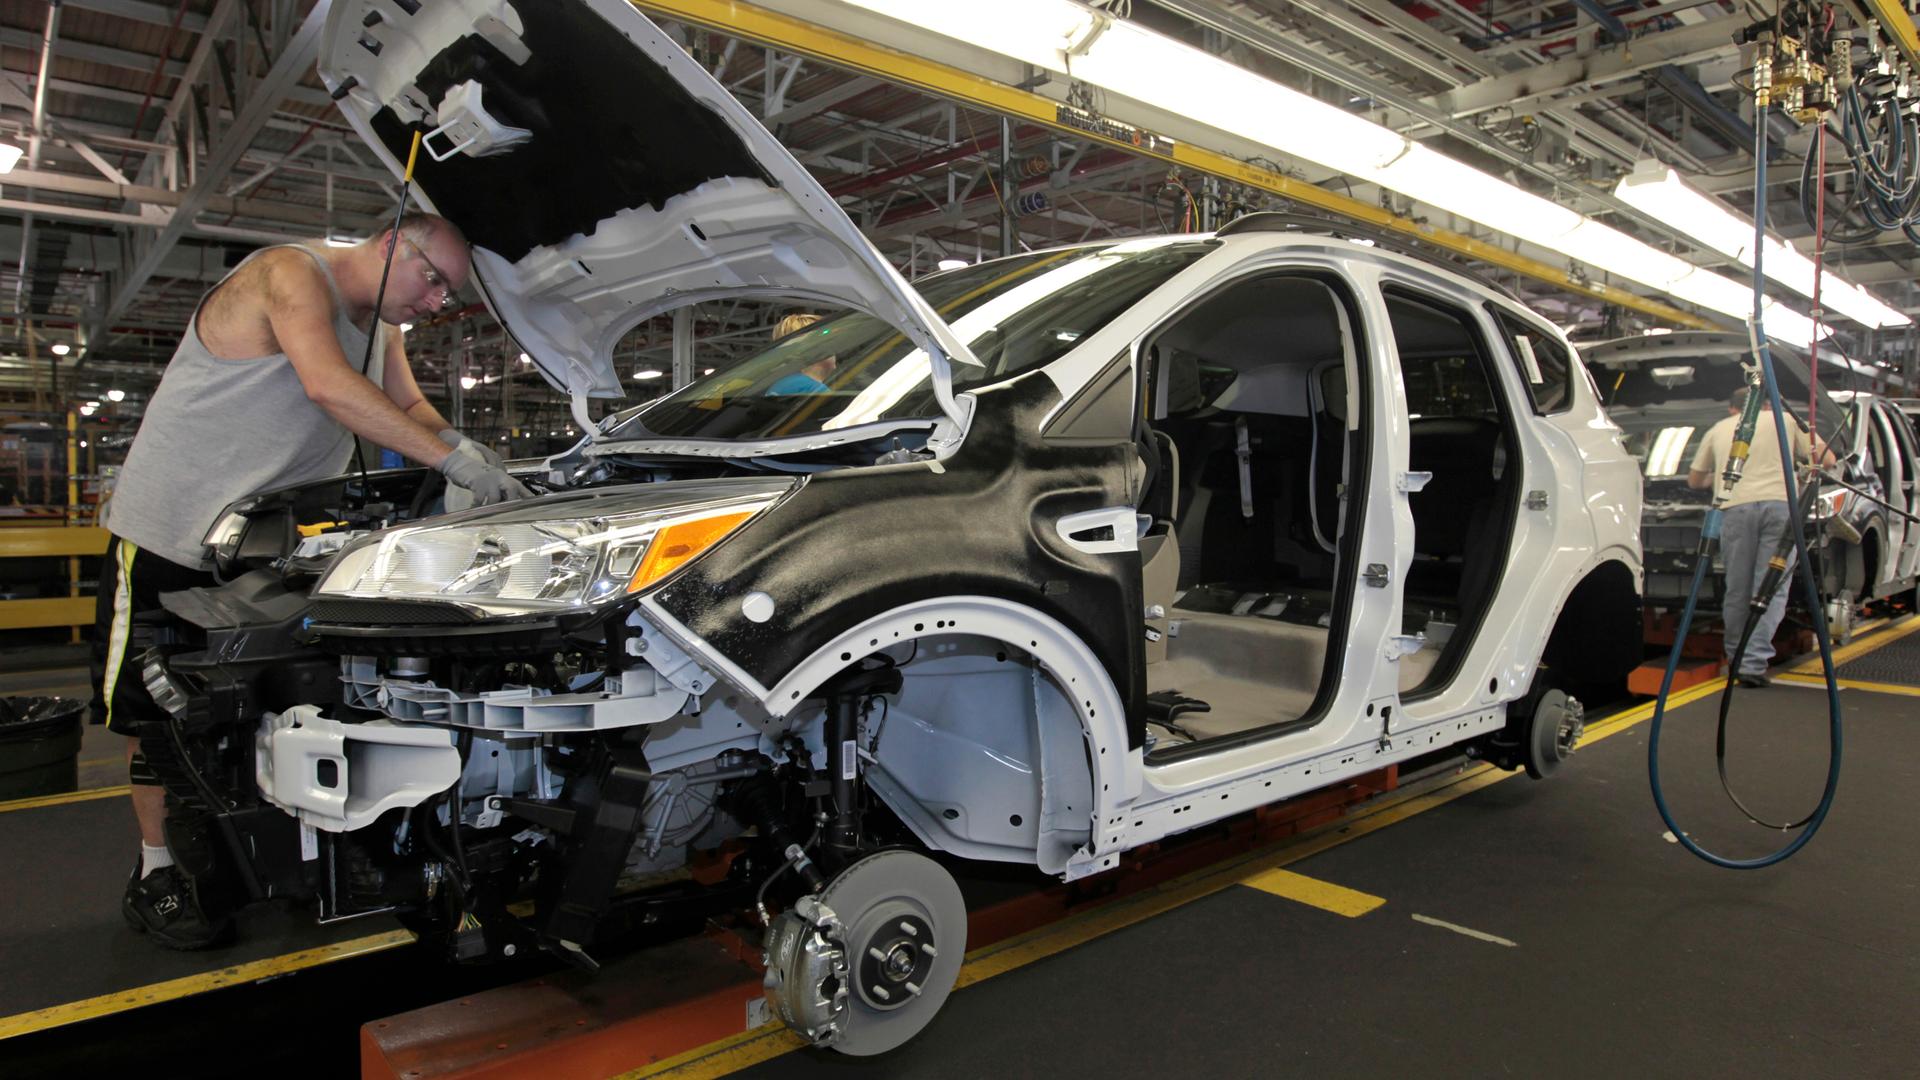 American workers assemble a Ford Escape on the production line in Louisville, Kentucky.